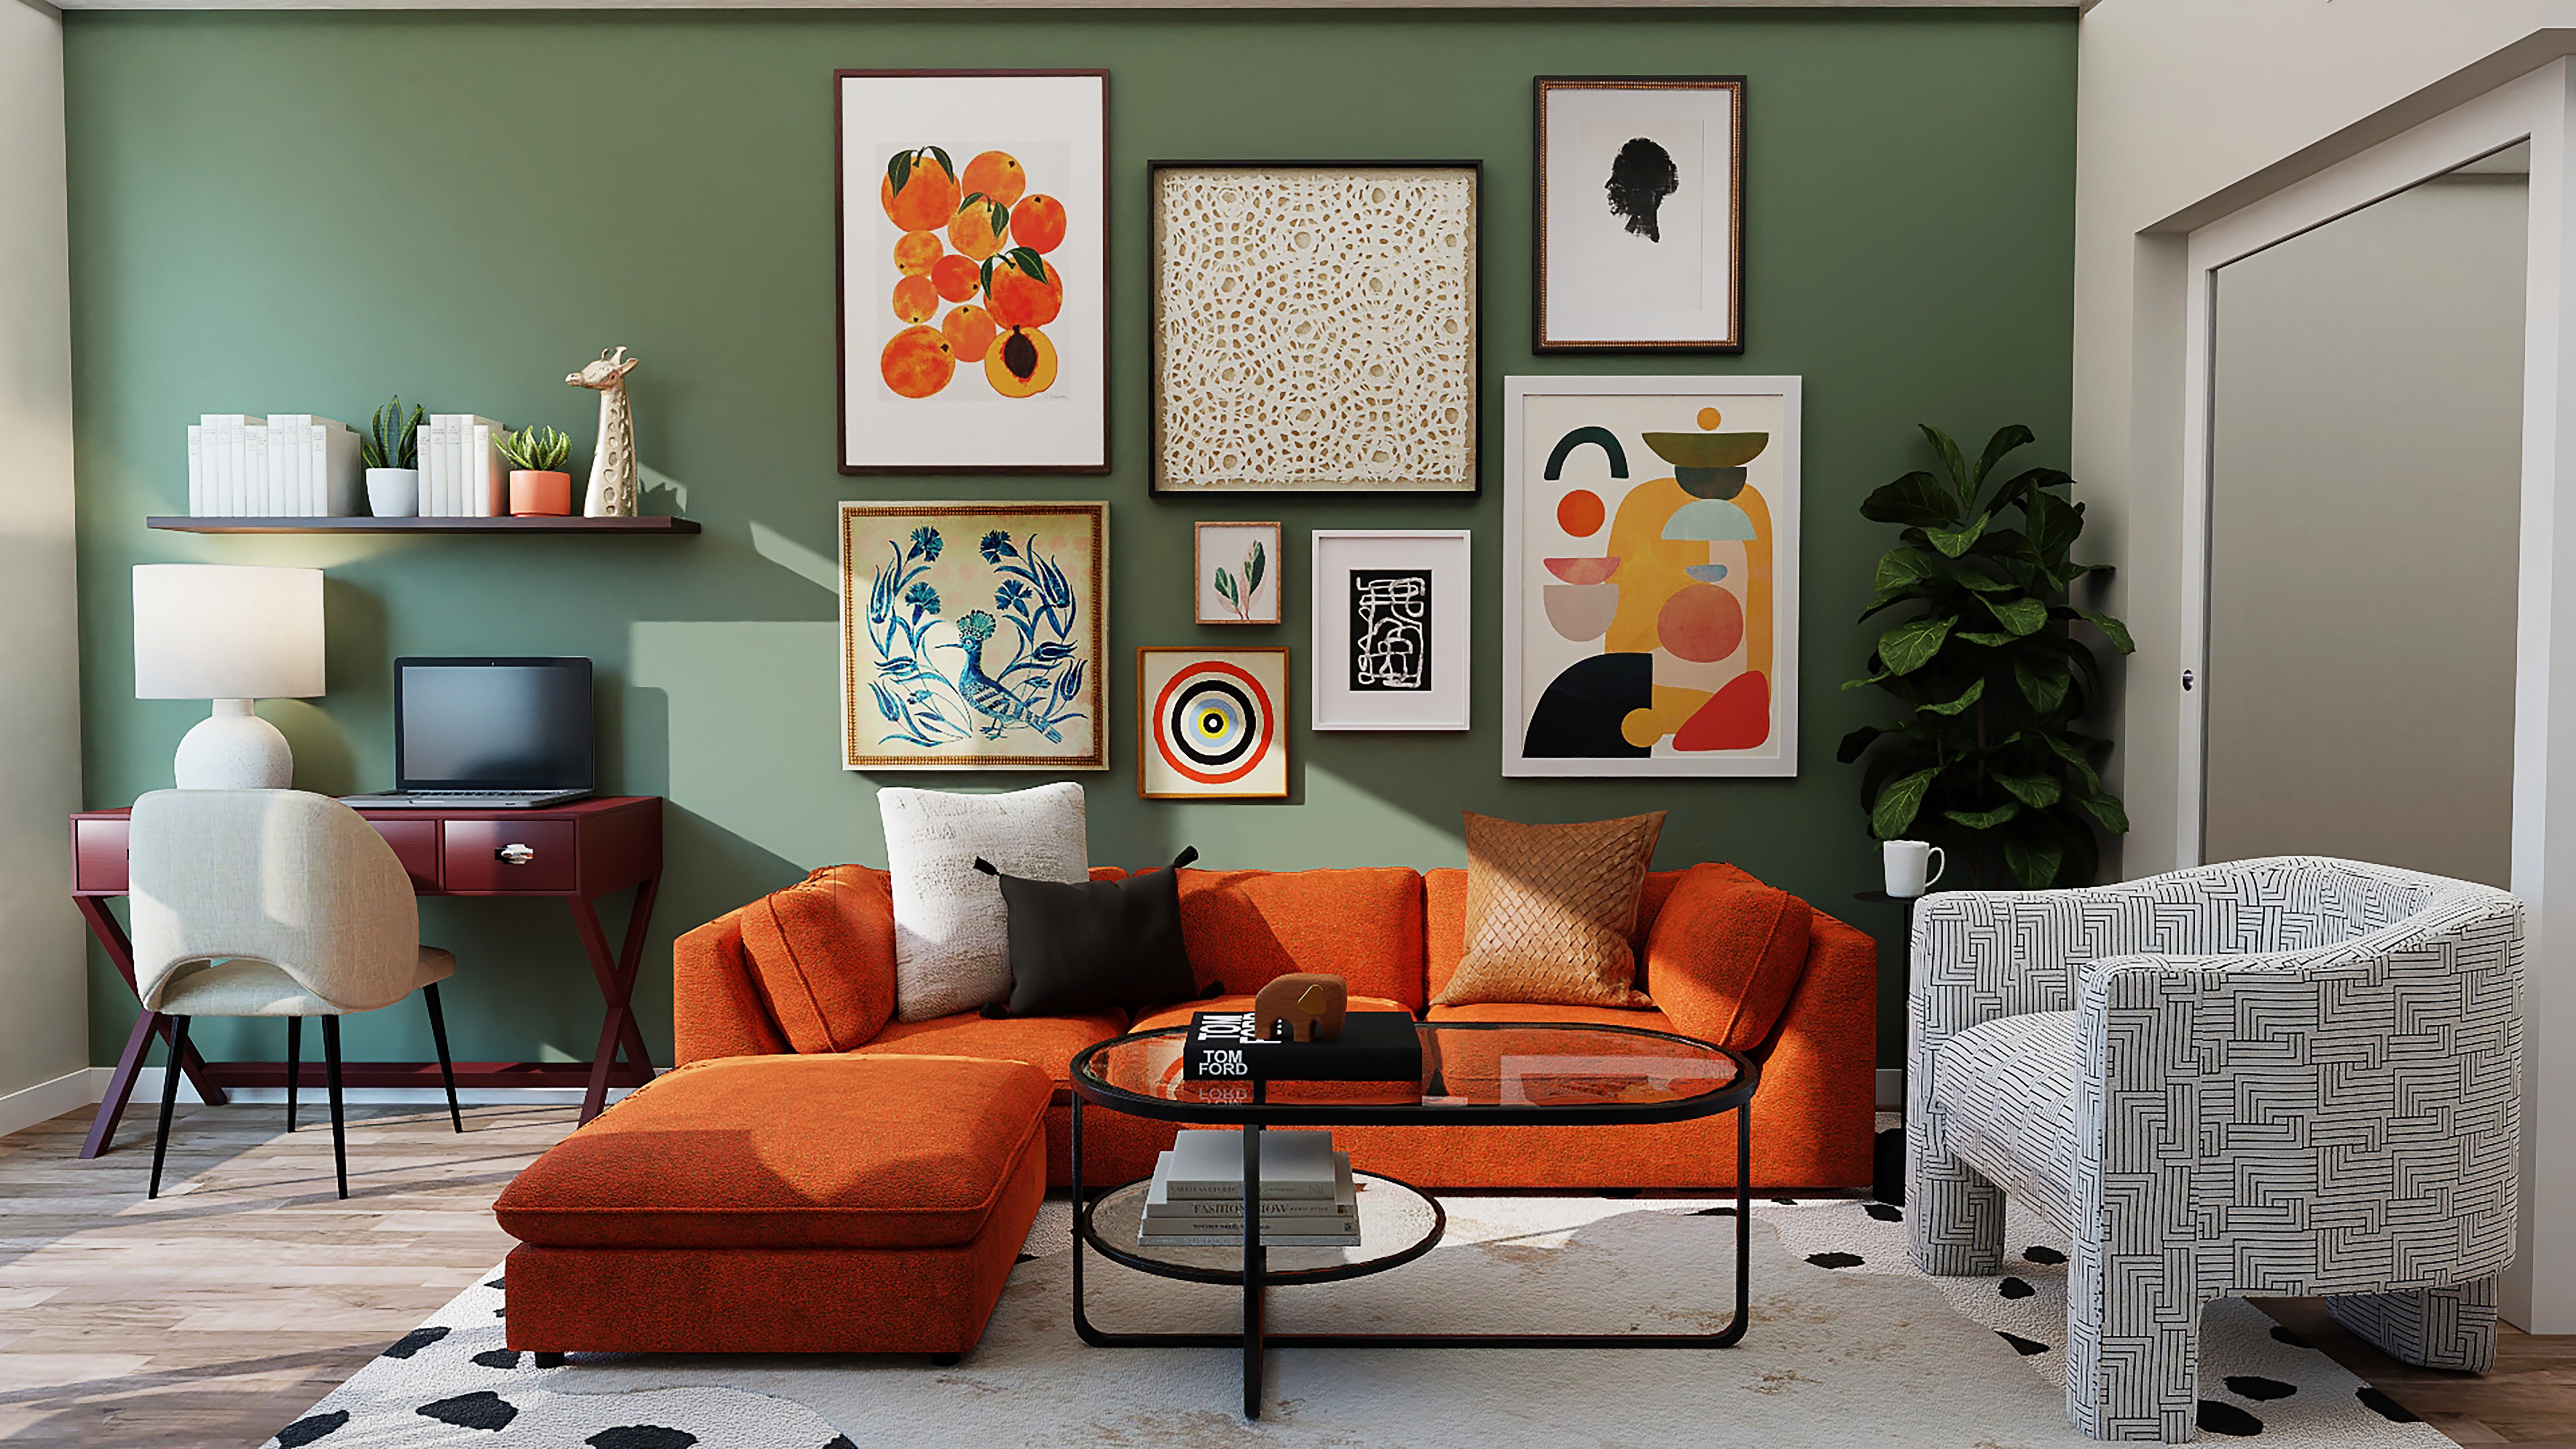 Living room with a dark sage green accent wall with image gallery and a bright orange couch.